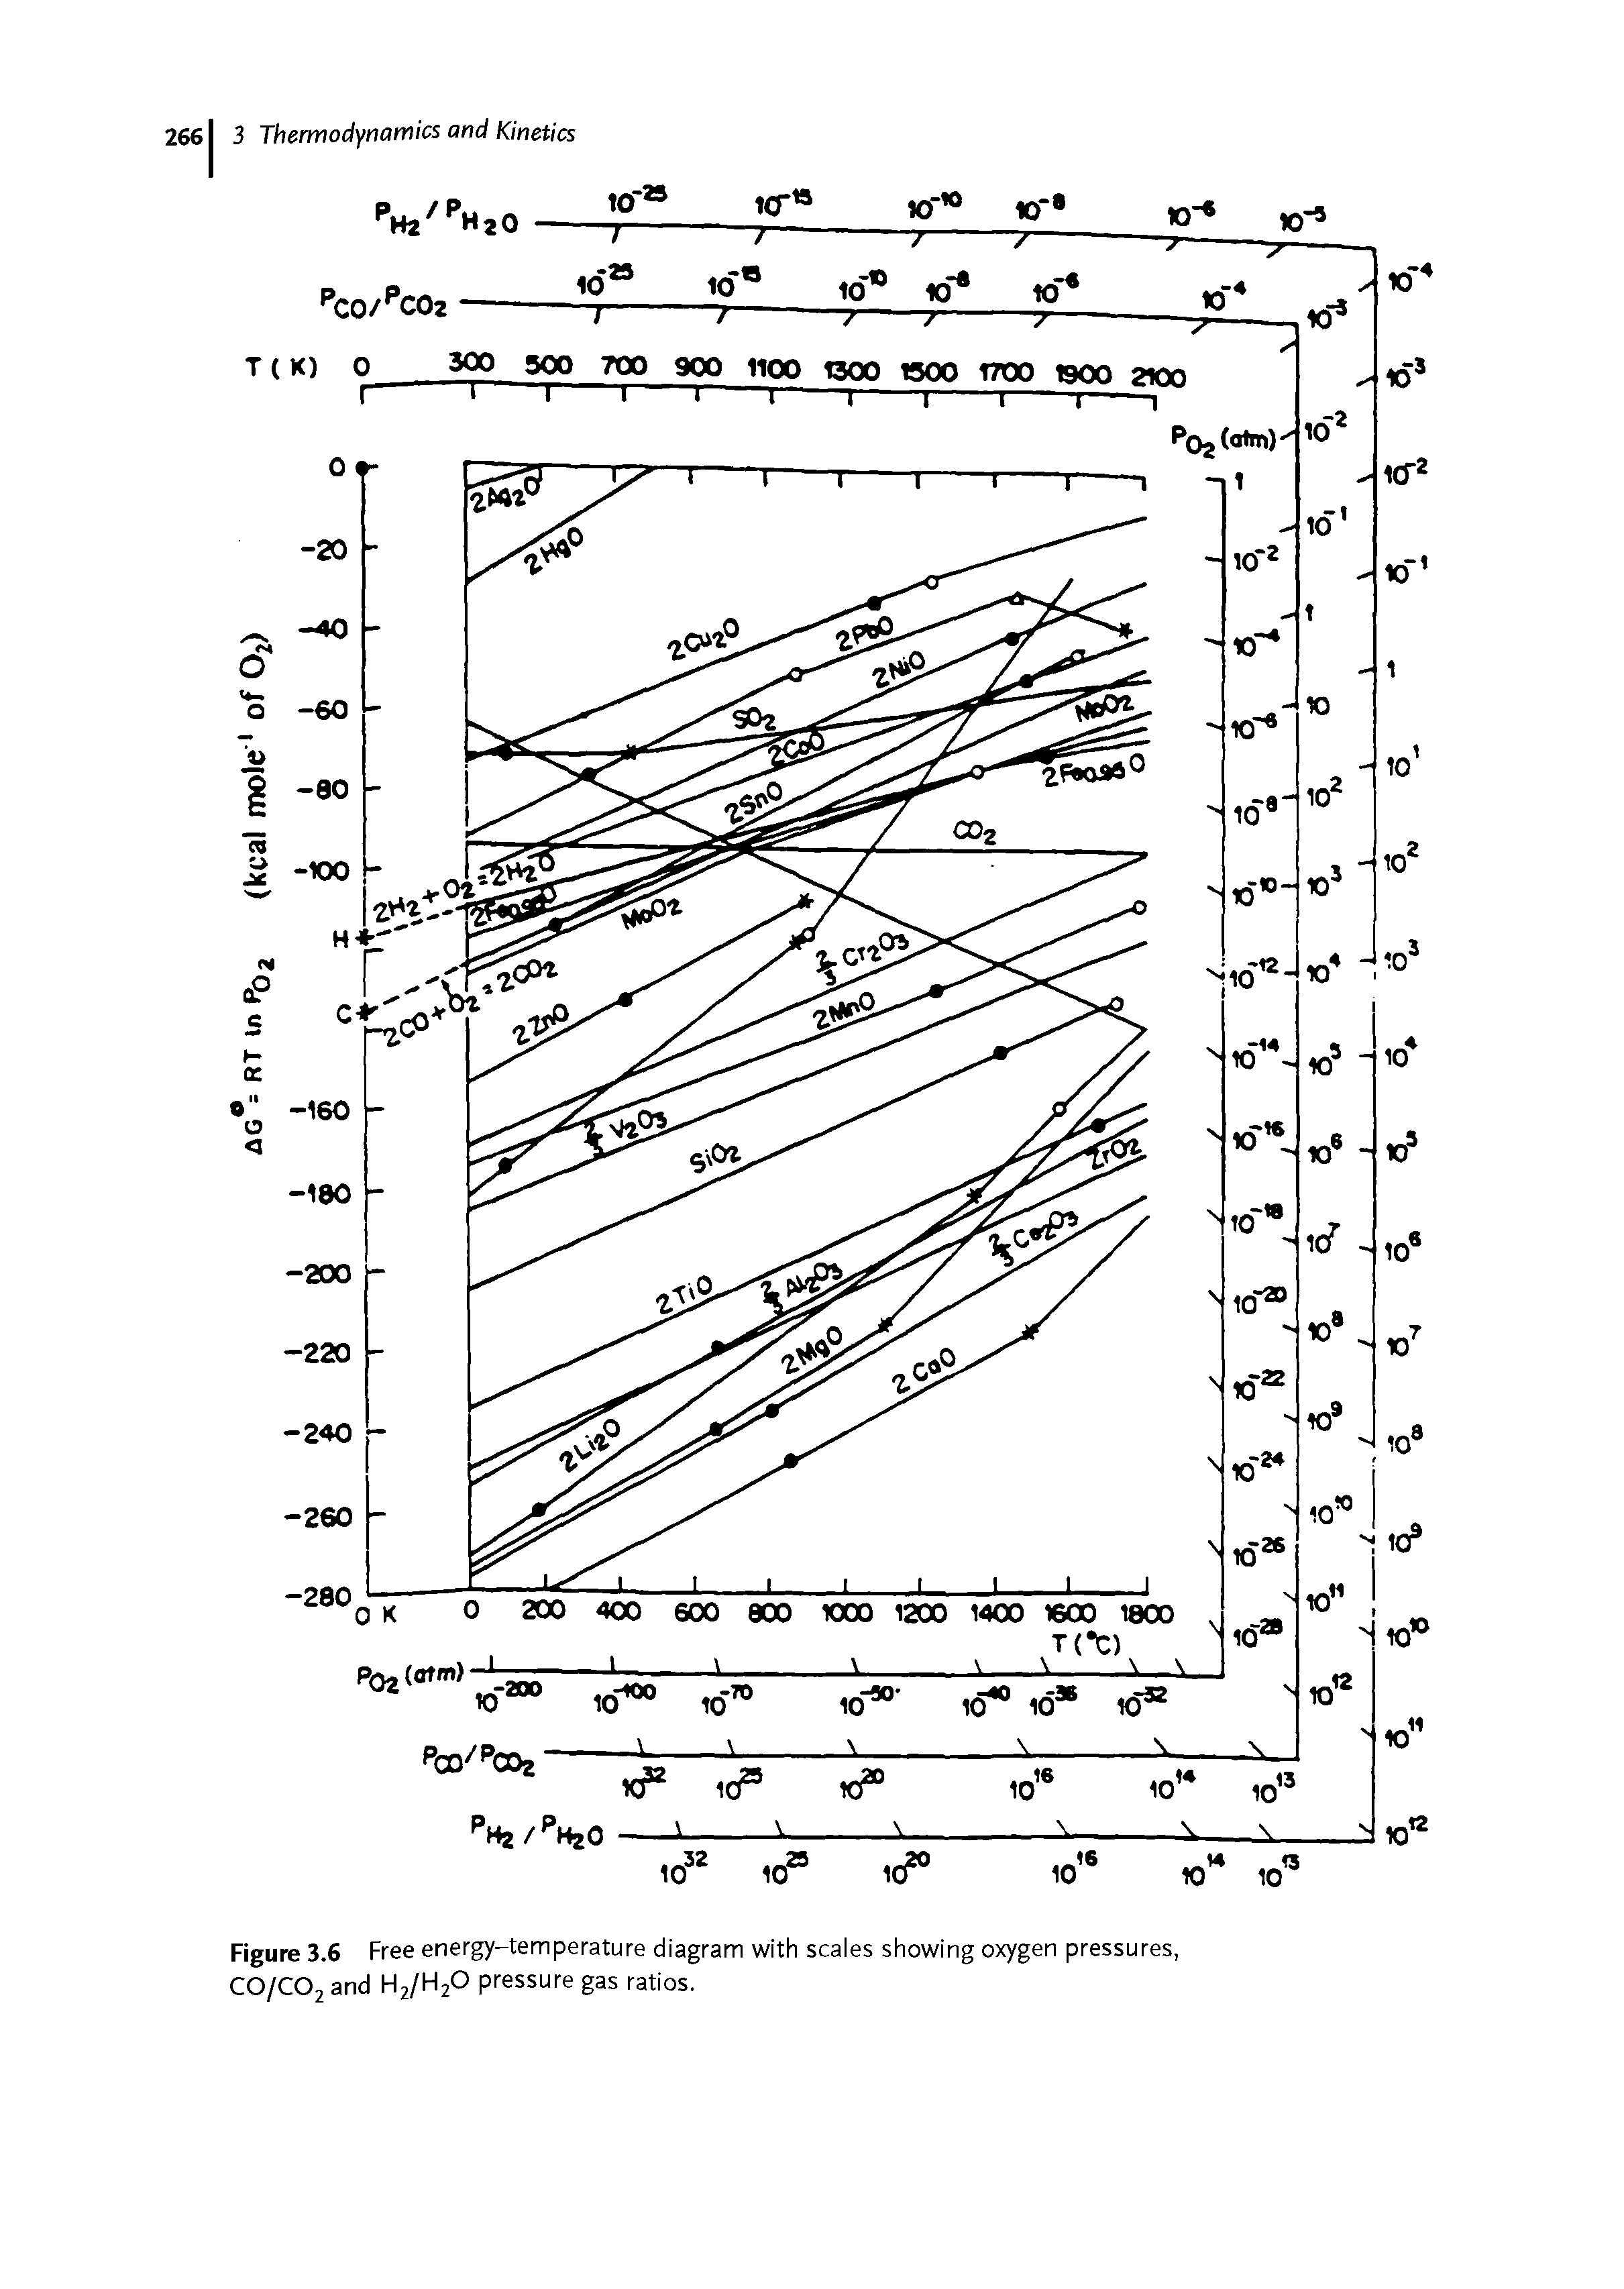 Figure 3.6 Free energy-temperature diagram with scales showing oxygen pressures, C0/C02 and H2/H20 pressure gas ratios.